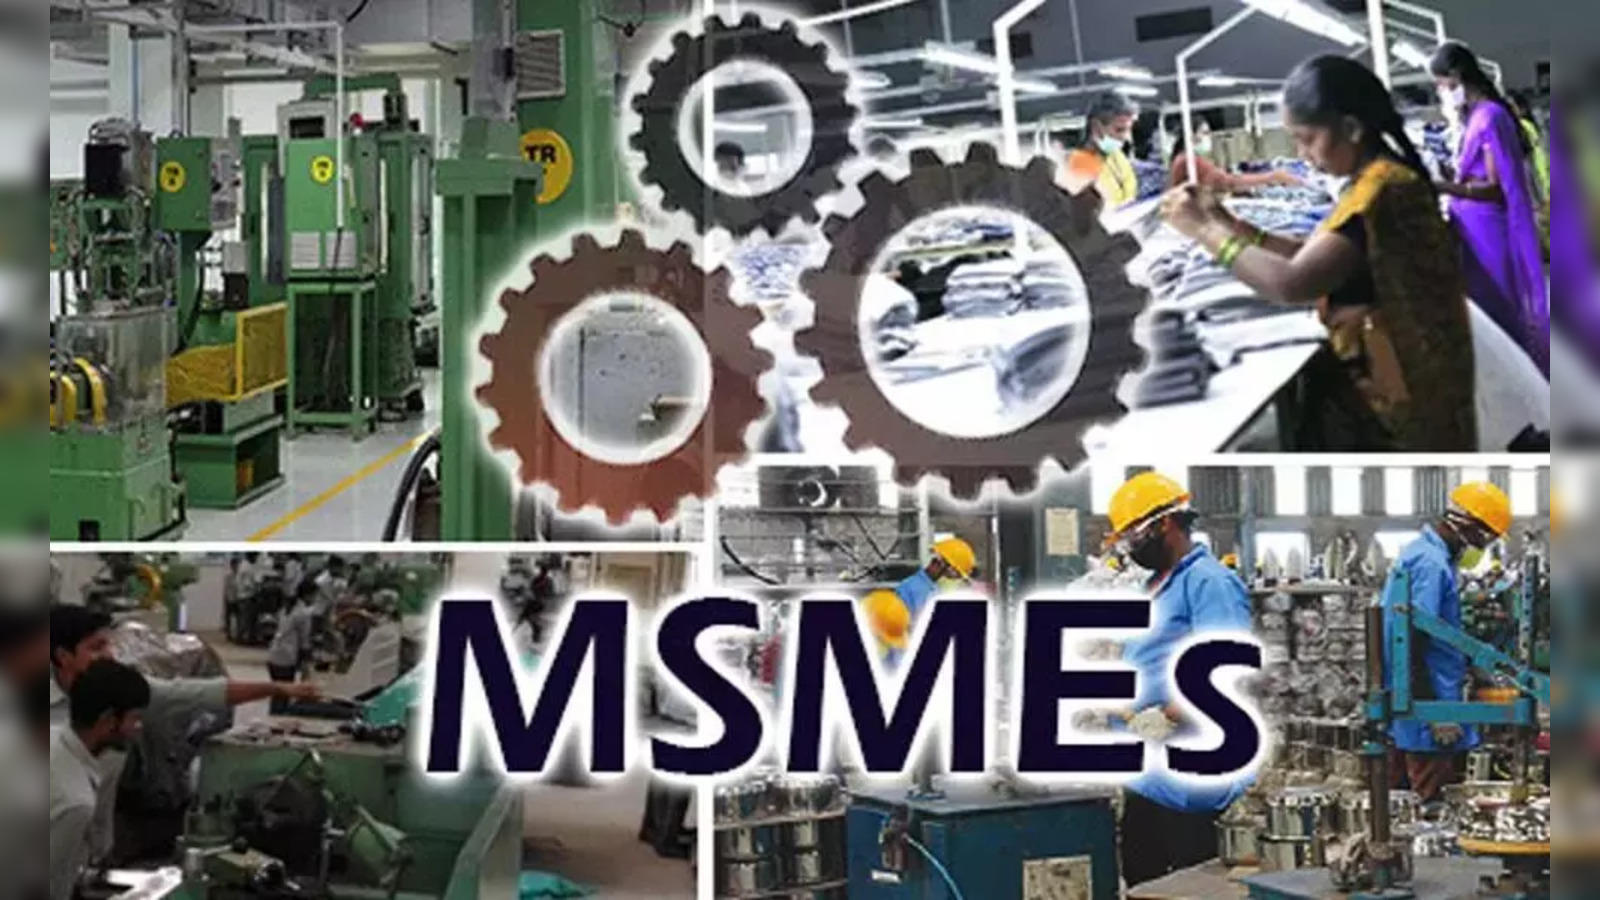 MSMEs India: MSMEs demand centralised, single window system for licences and registration - The Economic Times